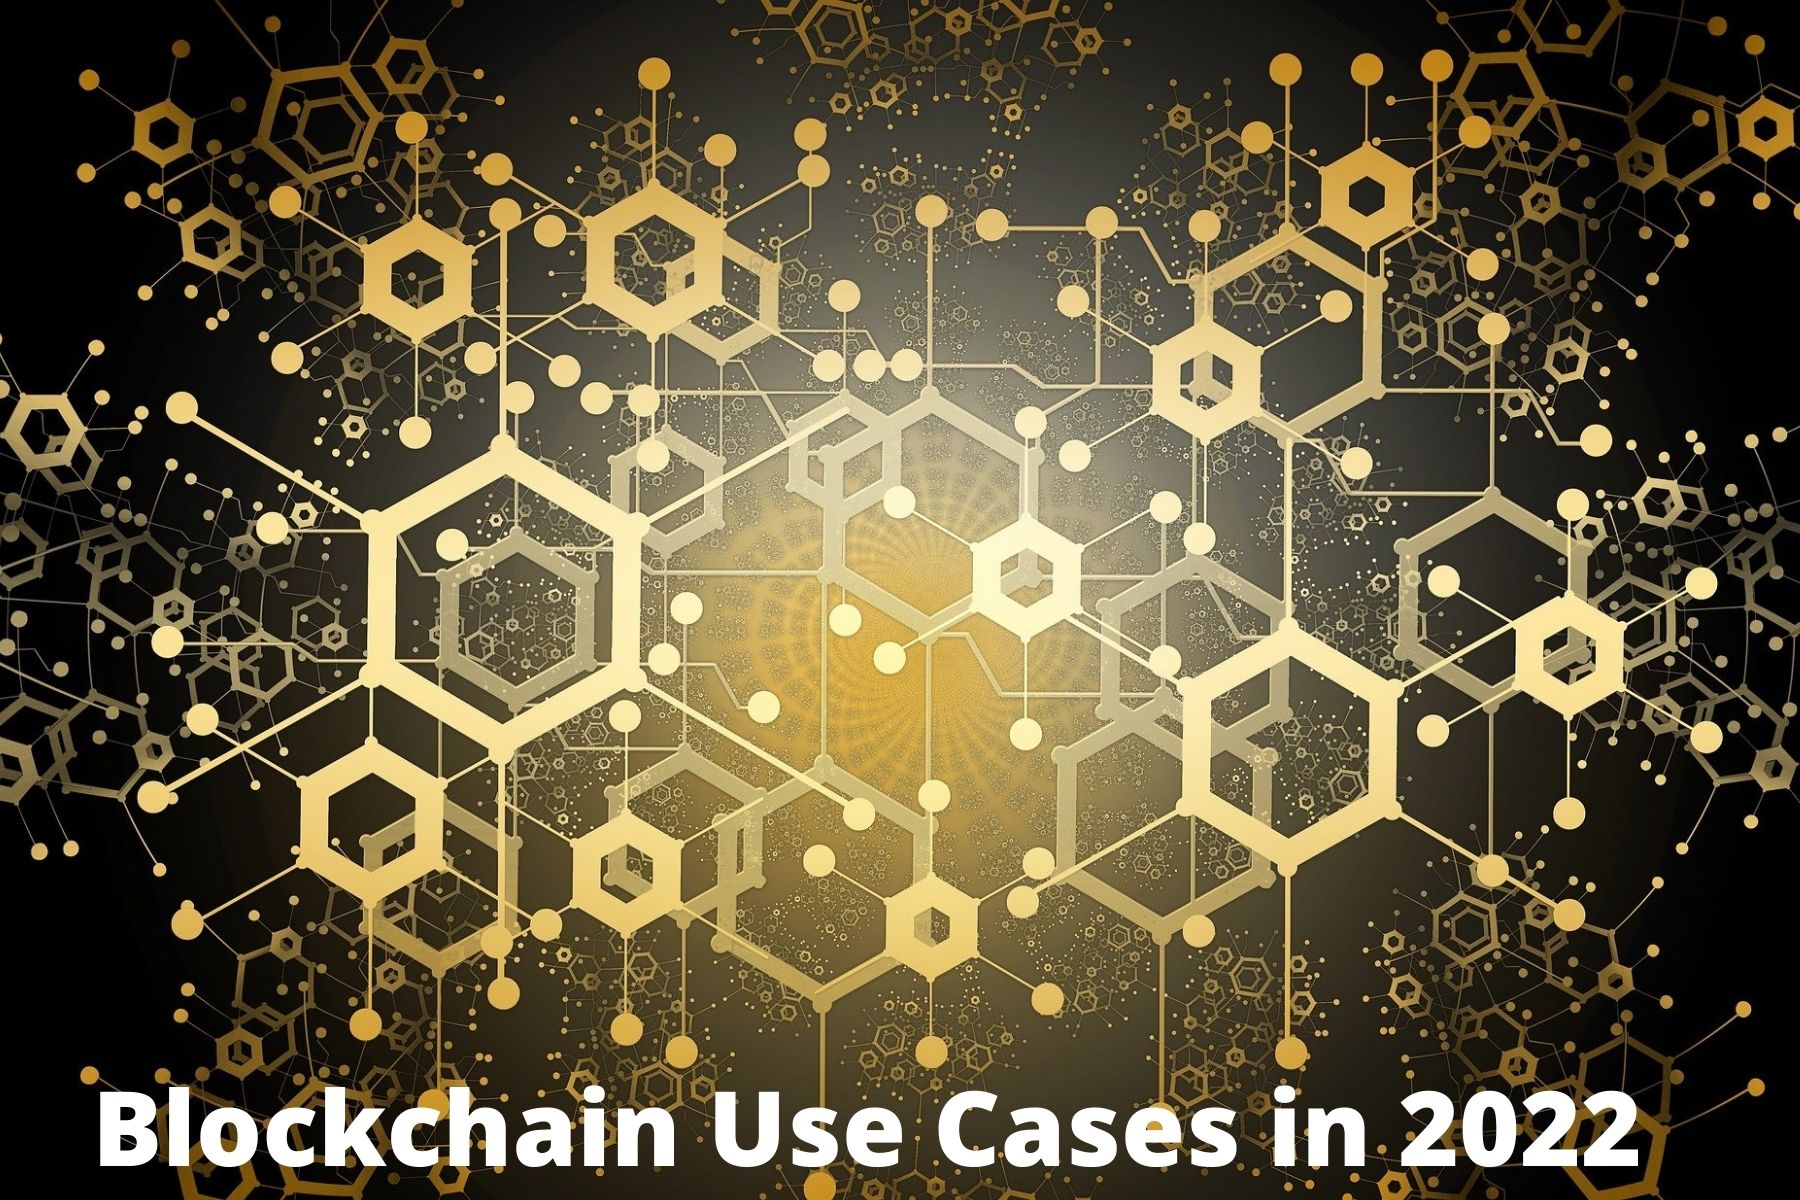 Blockchain Use Cases in 2022 Real World Industry Applications